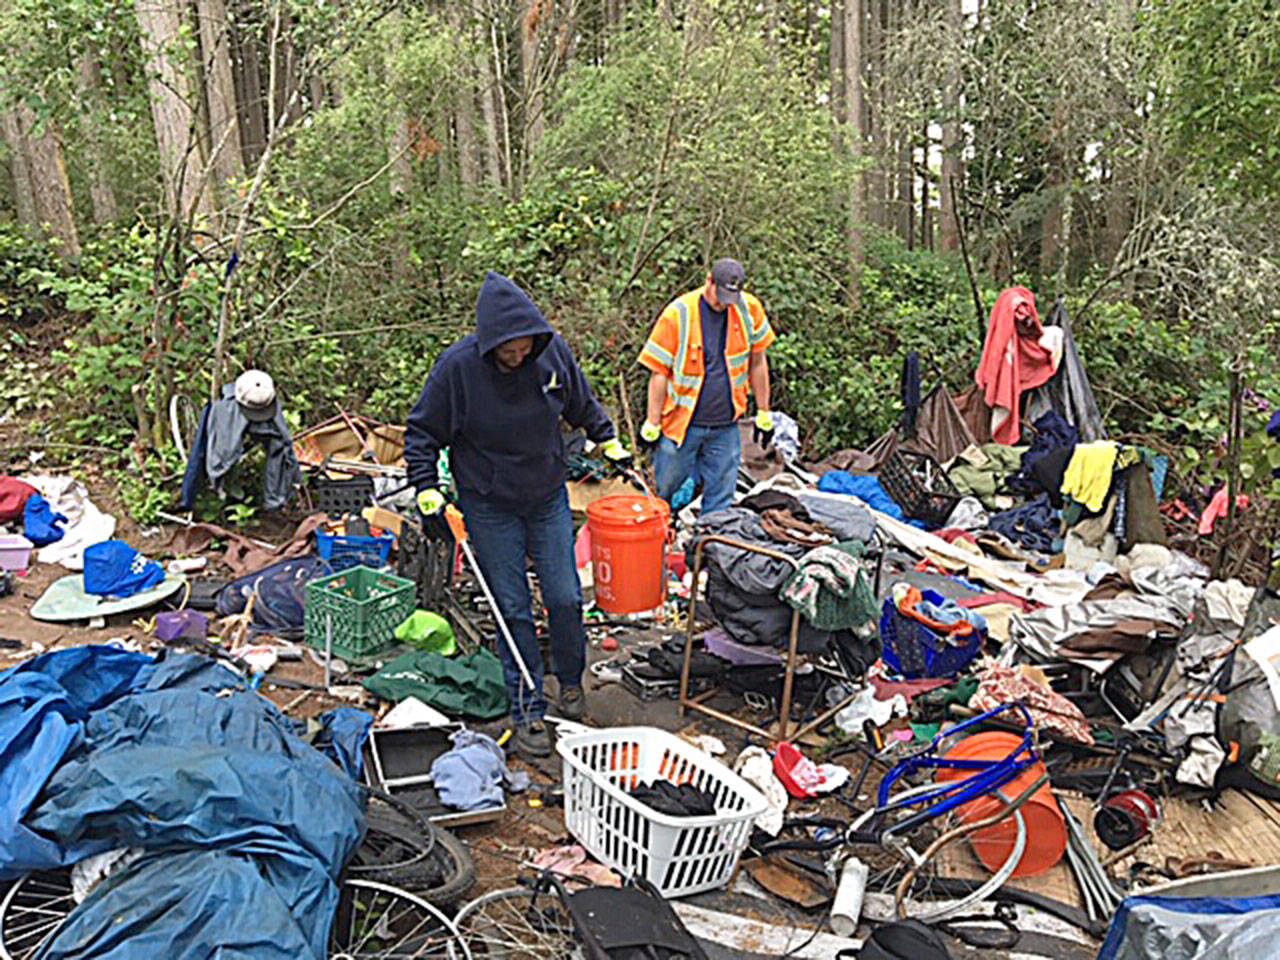 A work crew cleans up city property. (Photo provided by Oak Harbor Police Department)